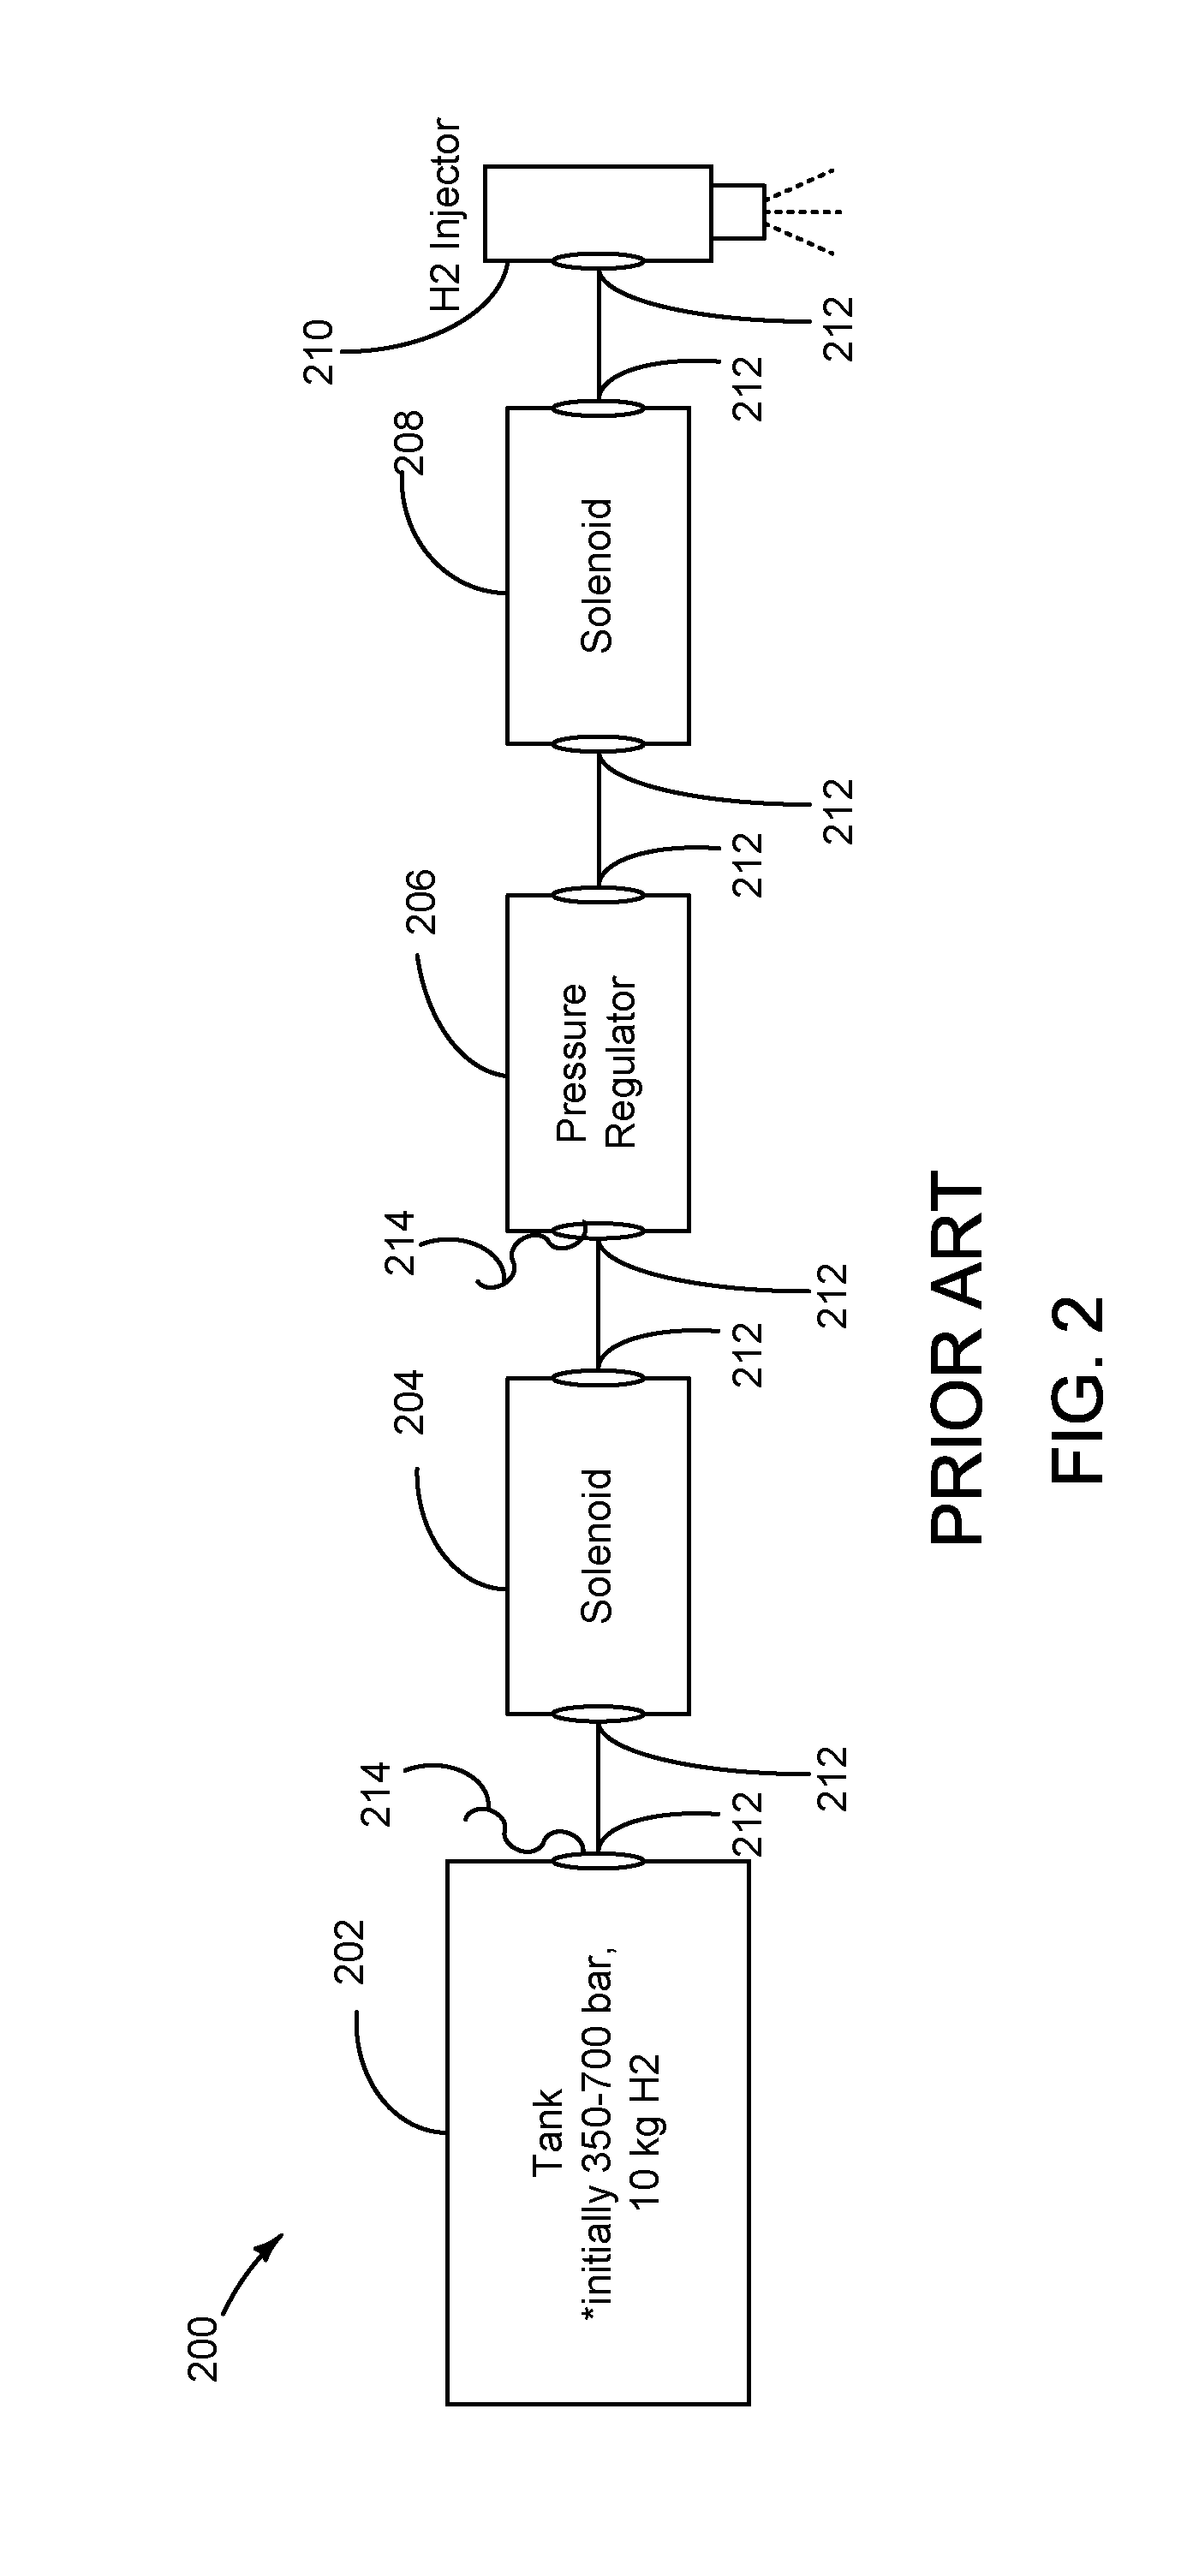 Integrated Gaseous Fuel Delivery System